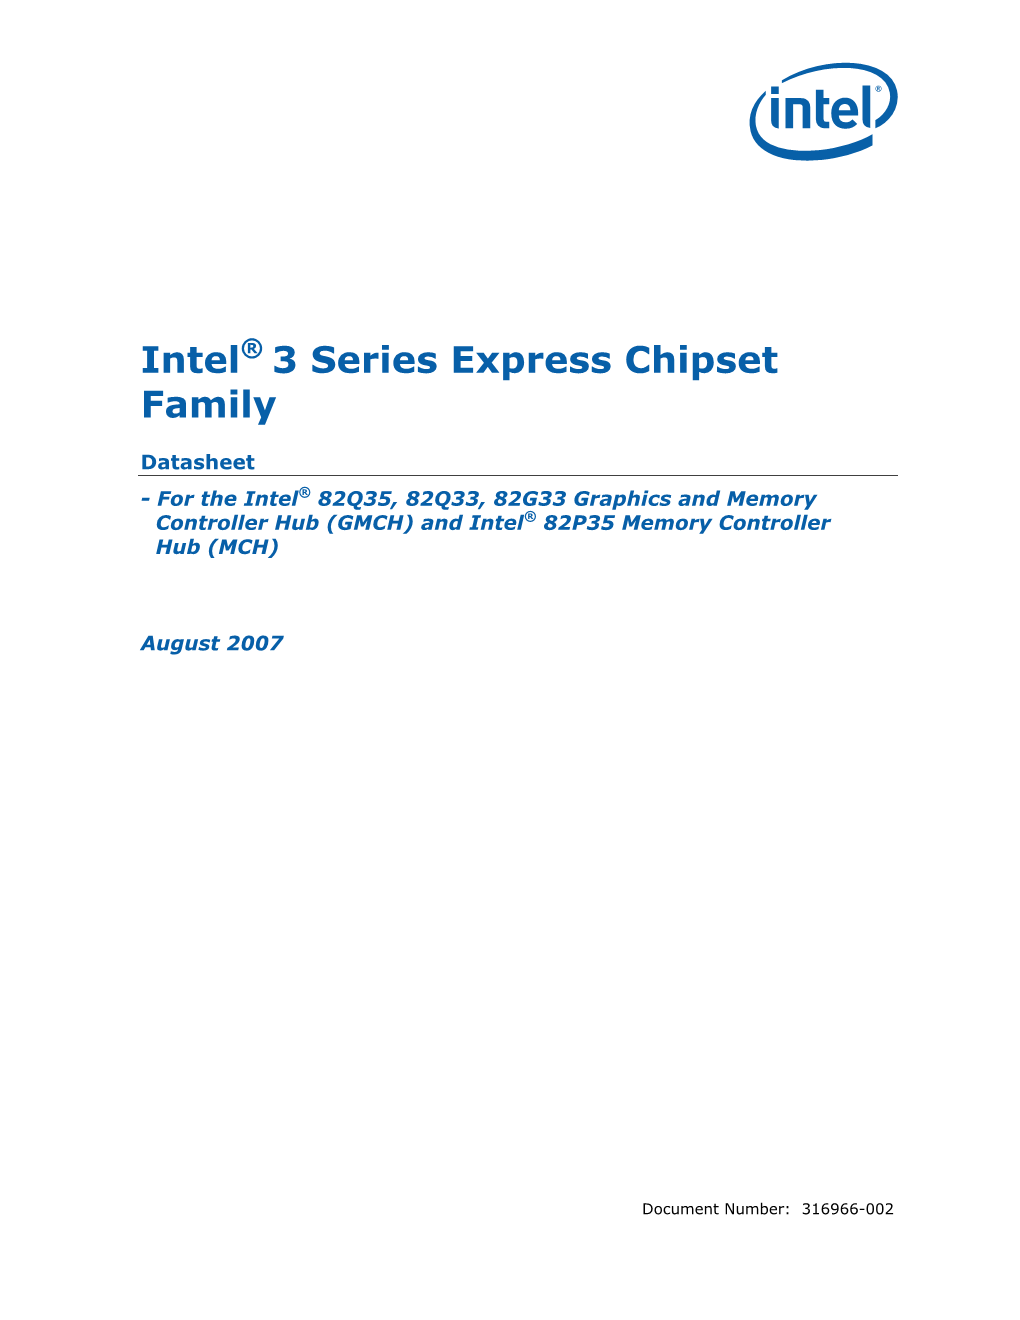 Intel® 3 Series Express Chipset Family